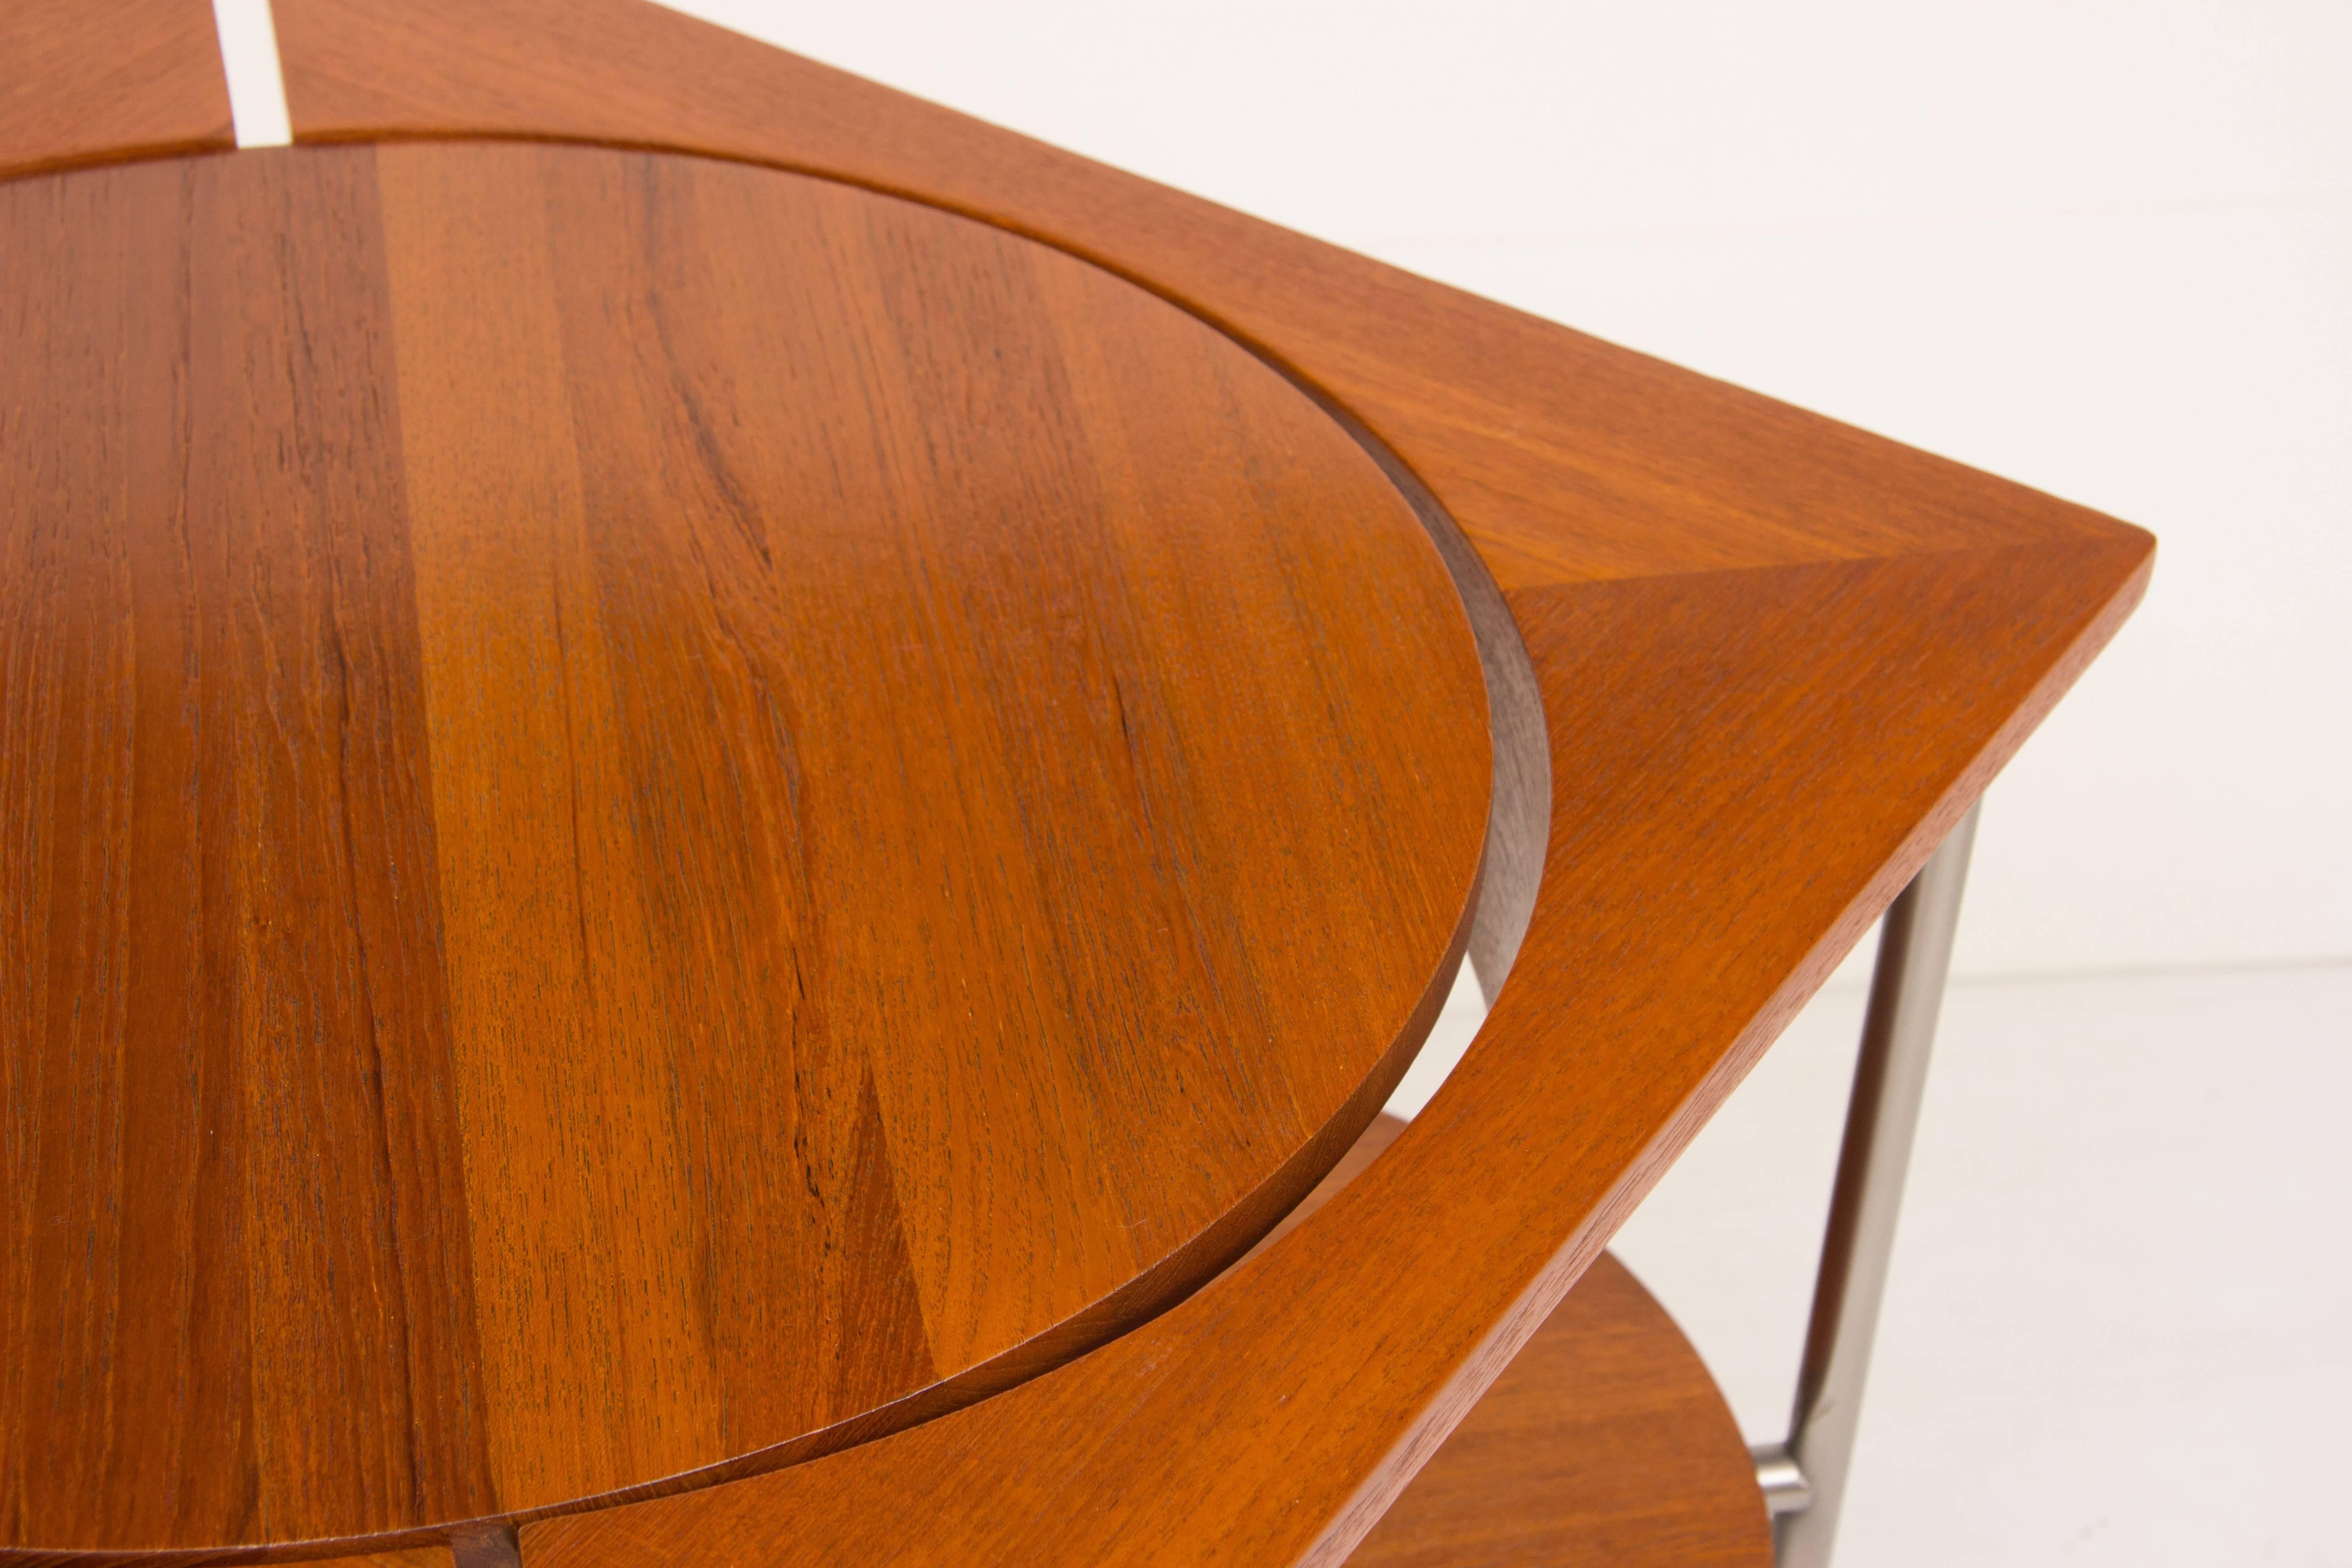 20th Century Midcentury Tables and Chairs Designed by Frans Schrofer